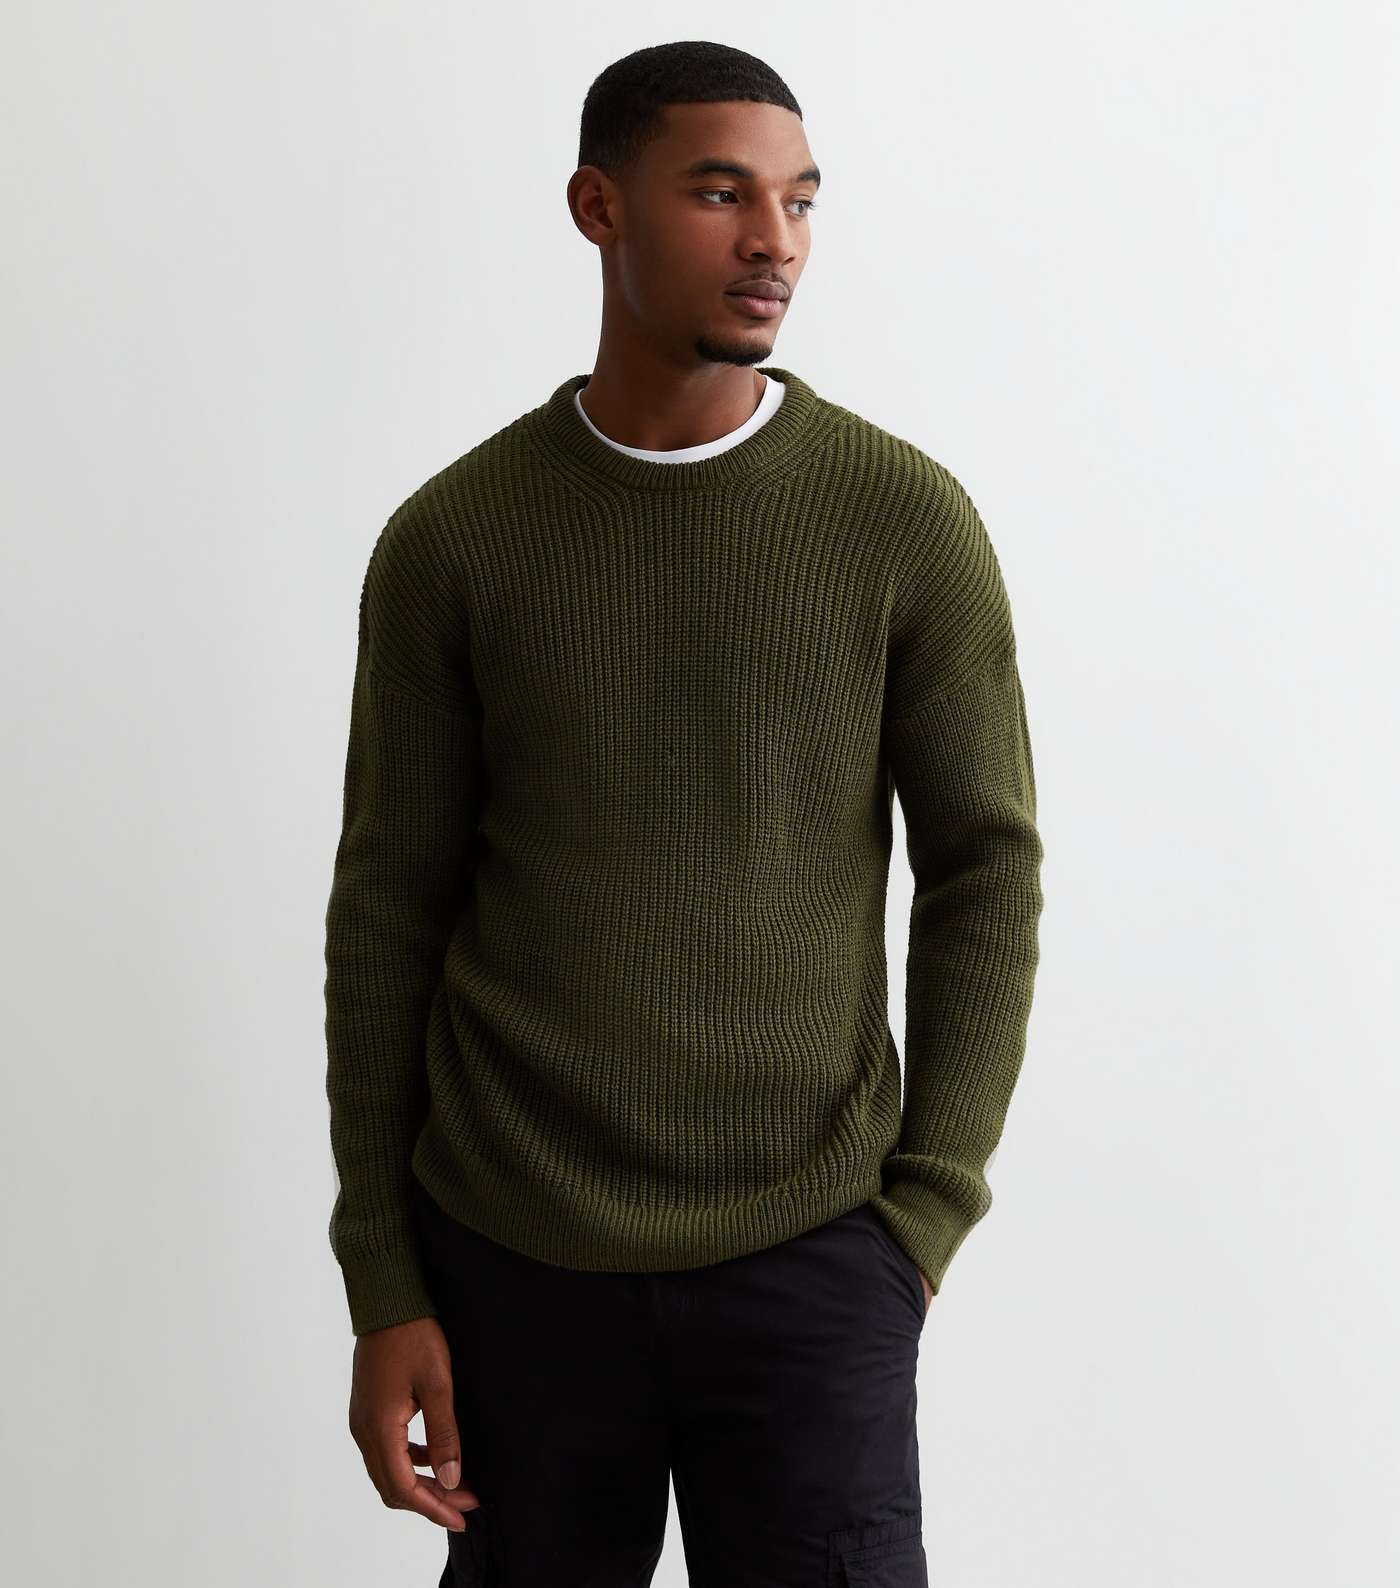 Khaki Fisherman Knit Crew Neck Relaxed Fit Jumper Image 2